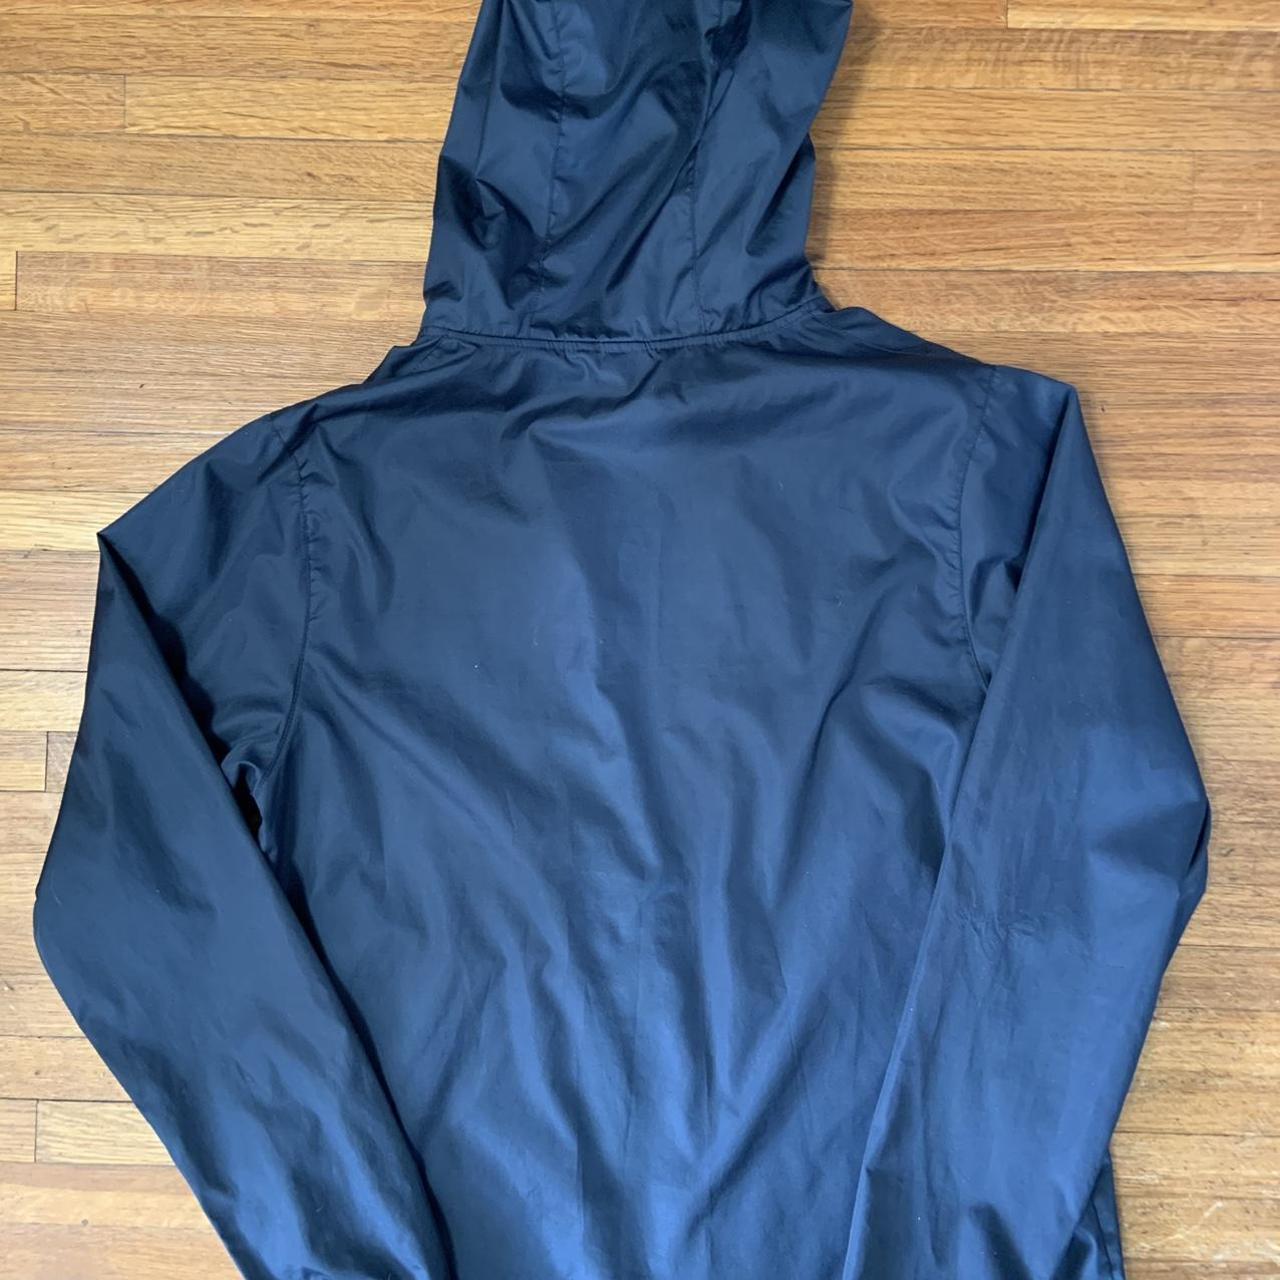 Navy windbreaker! Perfect for layering or a slightly... - Depop